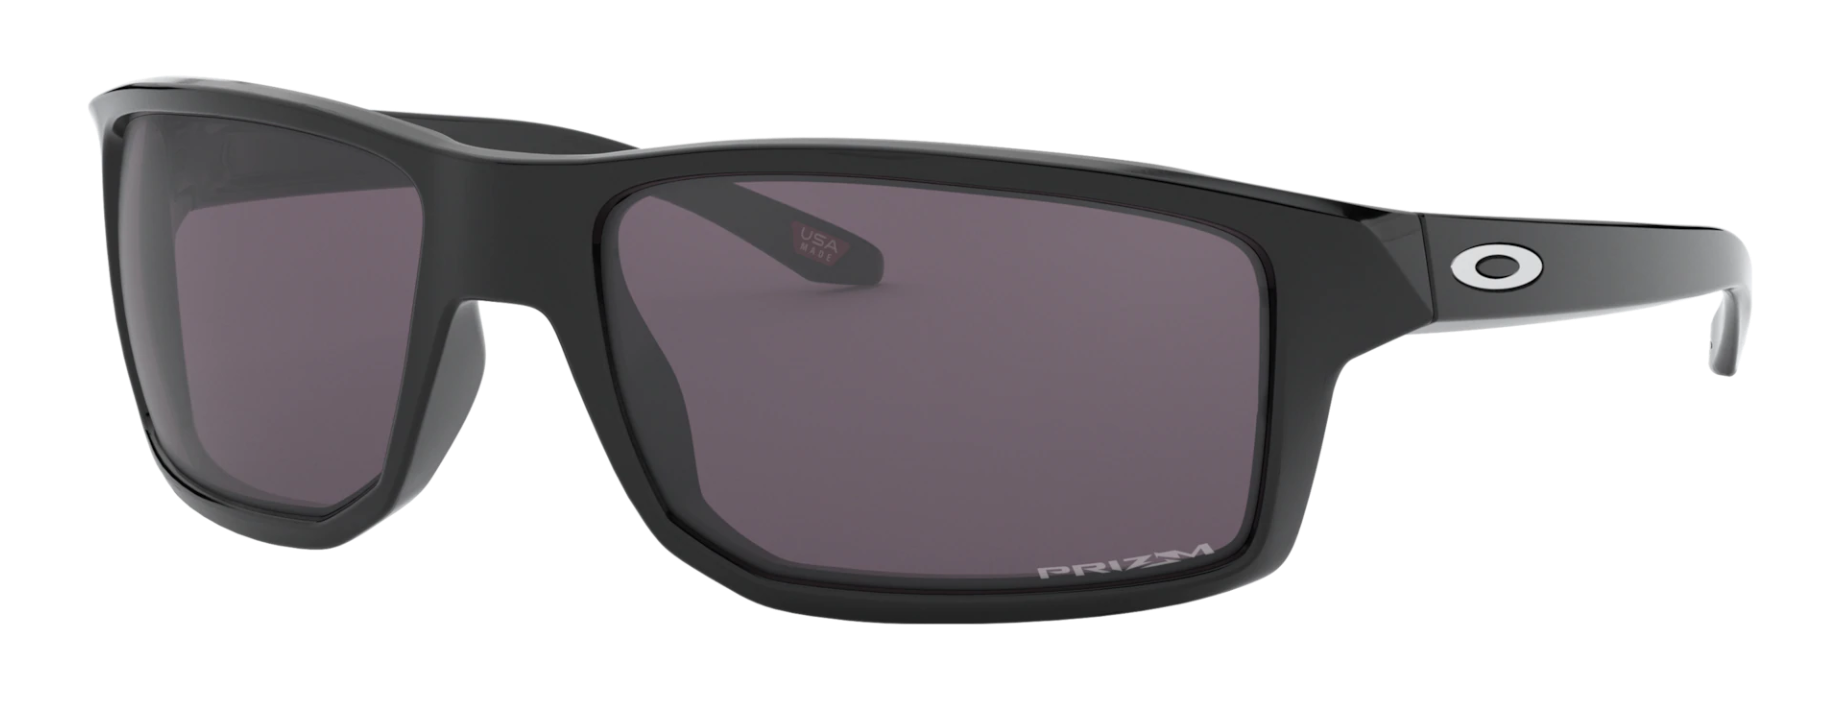 Oakley Gibston motorcycle glasses for small faces in black with PRIZM grey lenses.